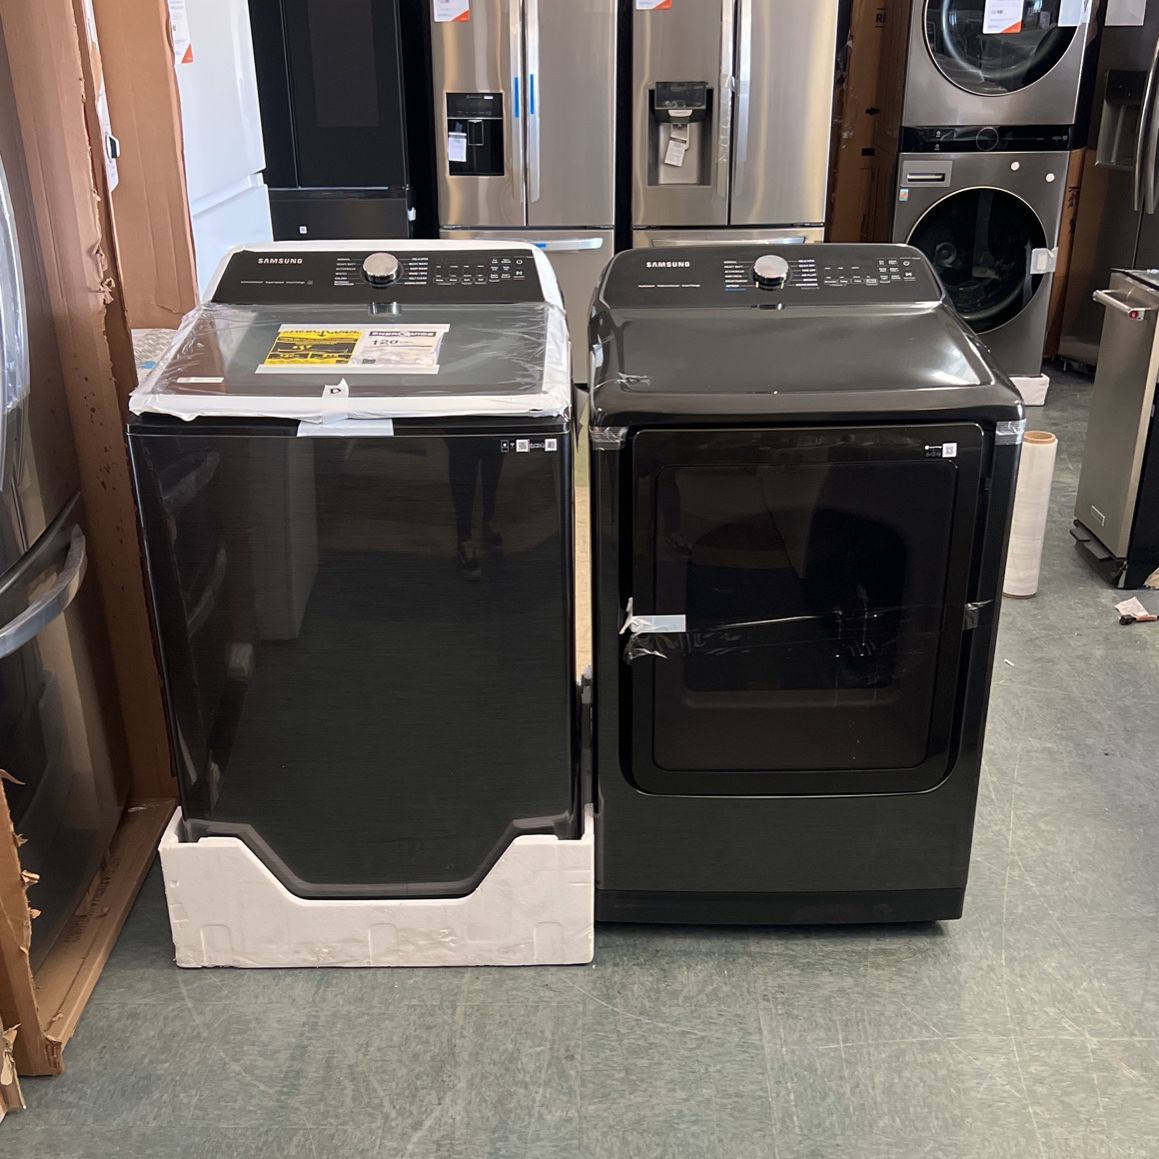 Samsung Black Stainless Steel XL 5.5 Cu Ft Top Load Washer & Electric Dryer Set 